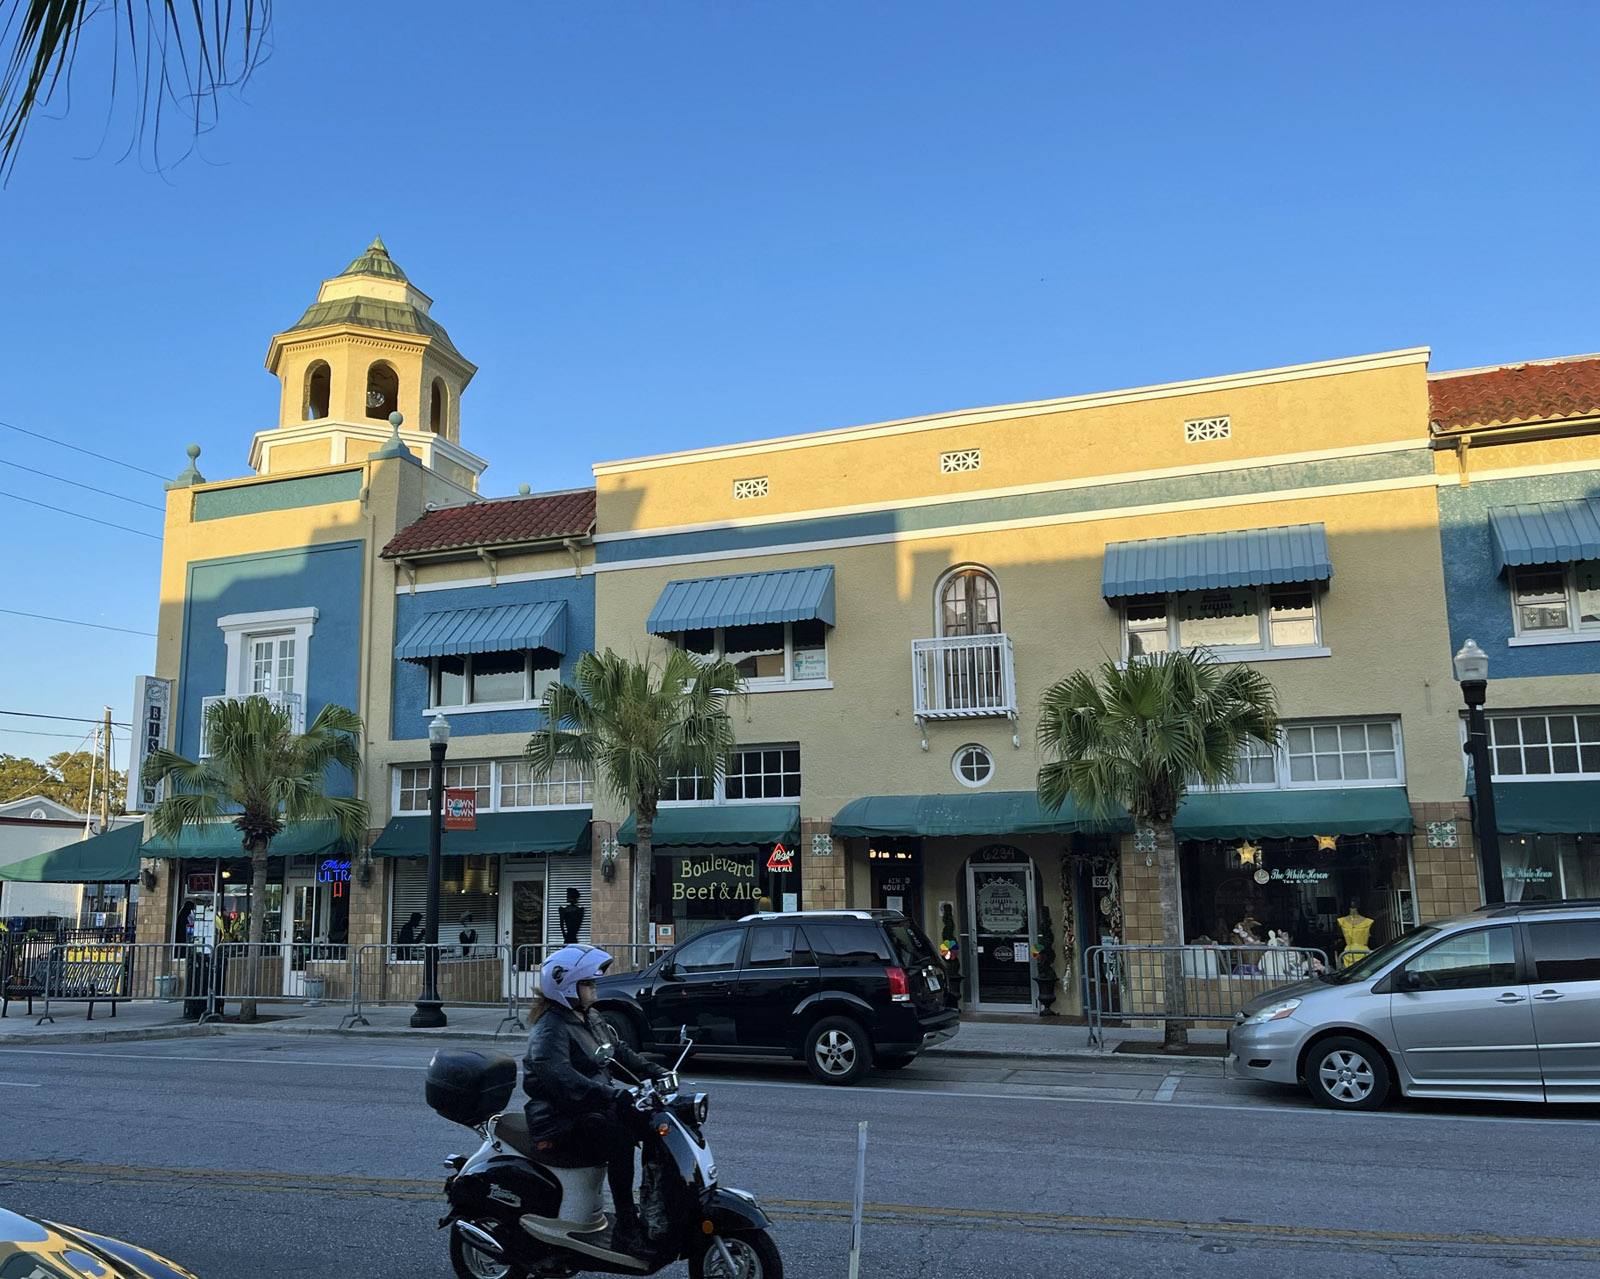 Downtown New Port Richey has preserved some historic buildings. (Photo: Bonnie Gross)